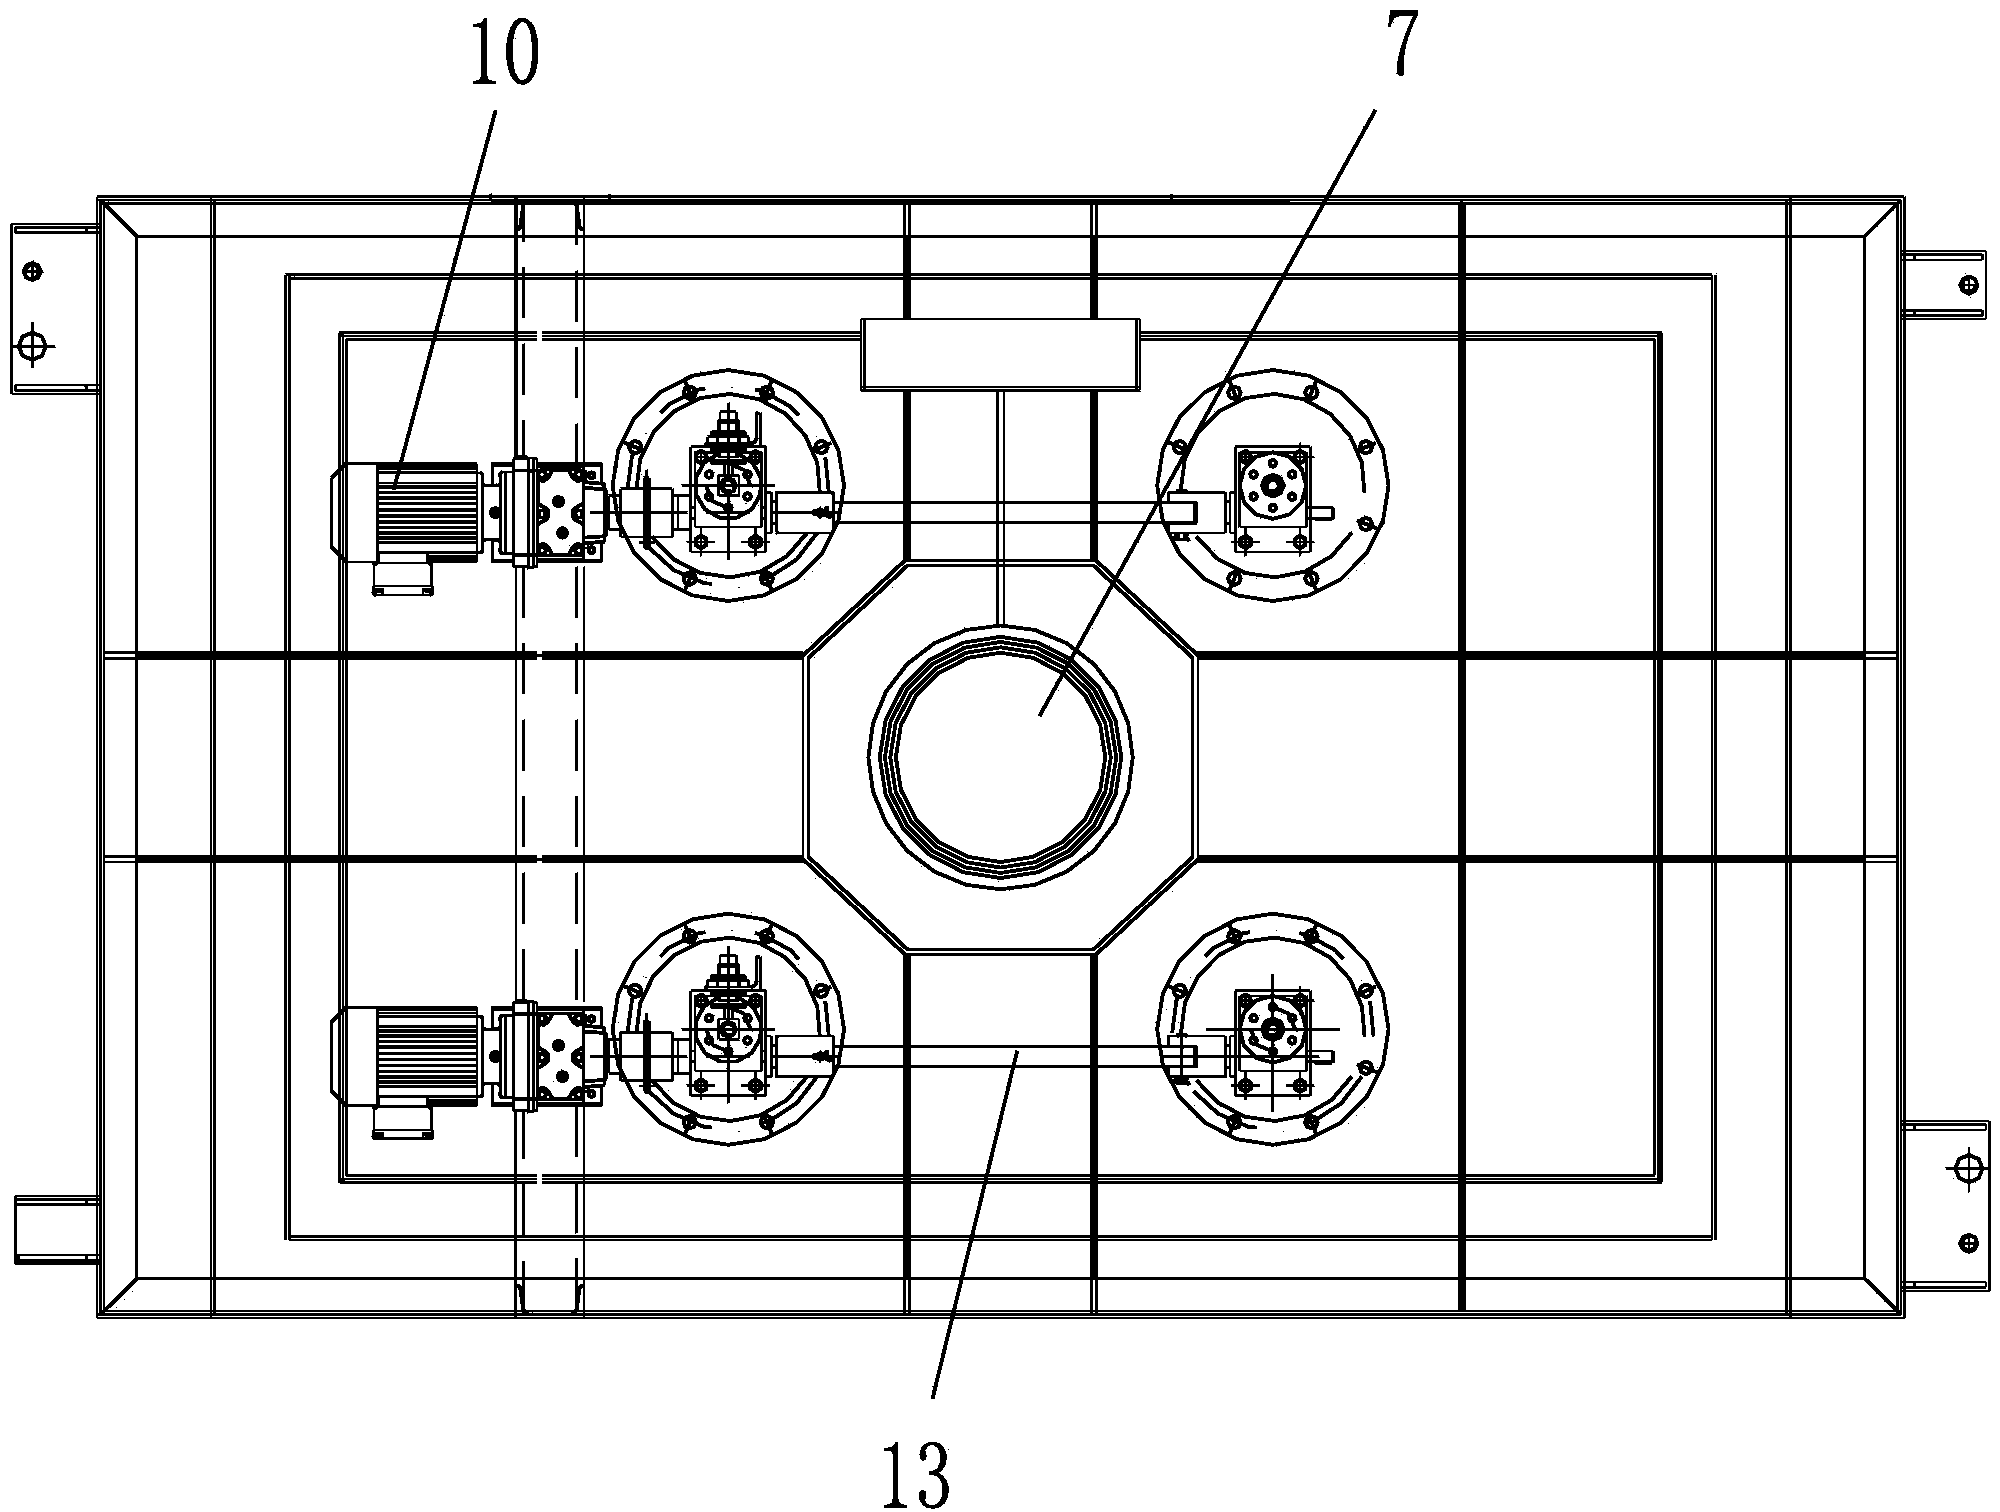 Sealing device for gas isolation of furnace sections